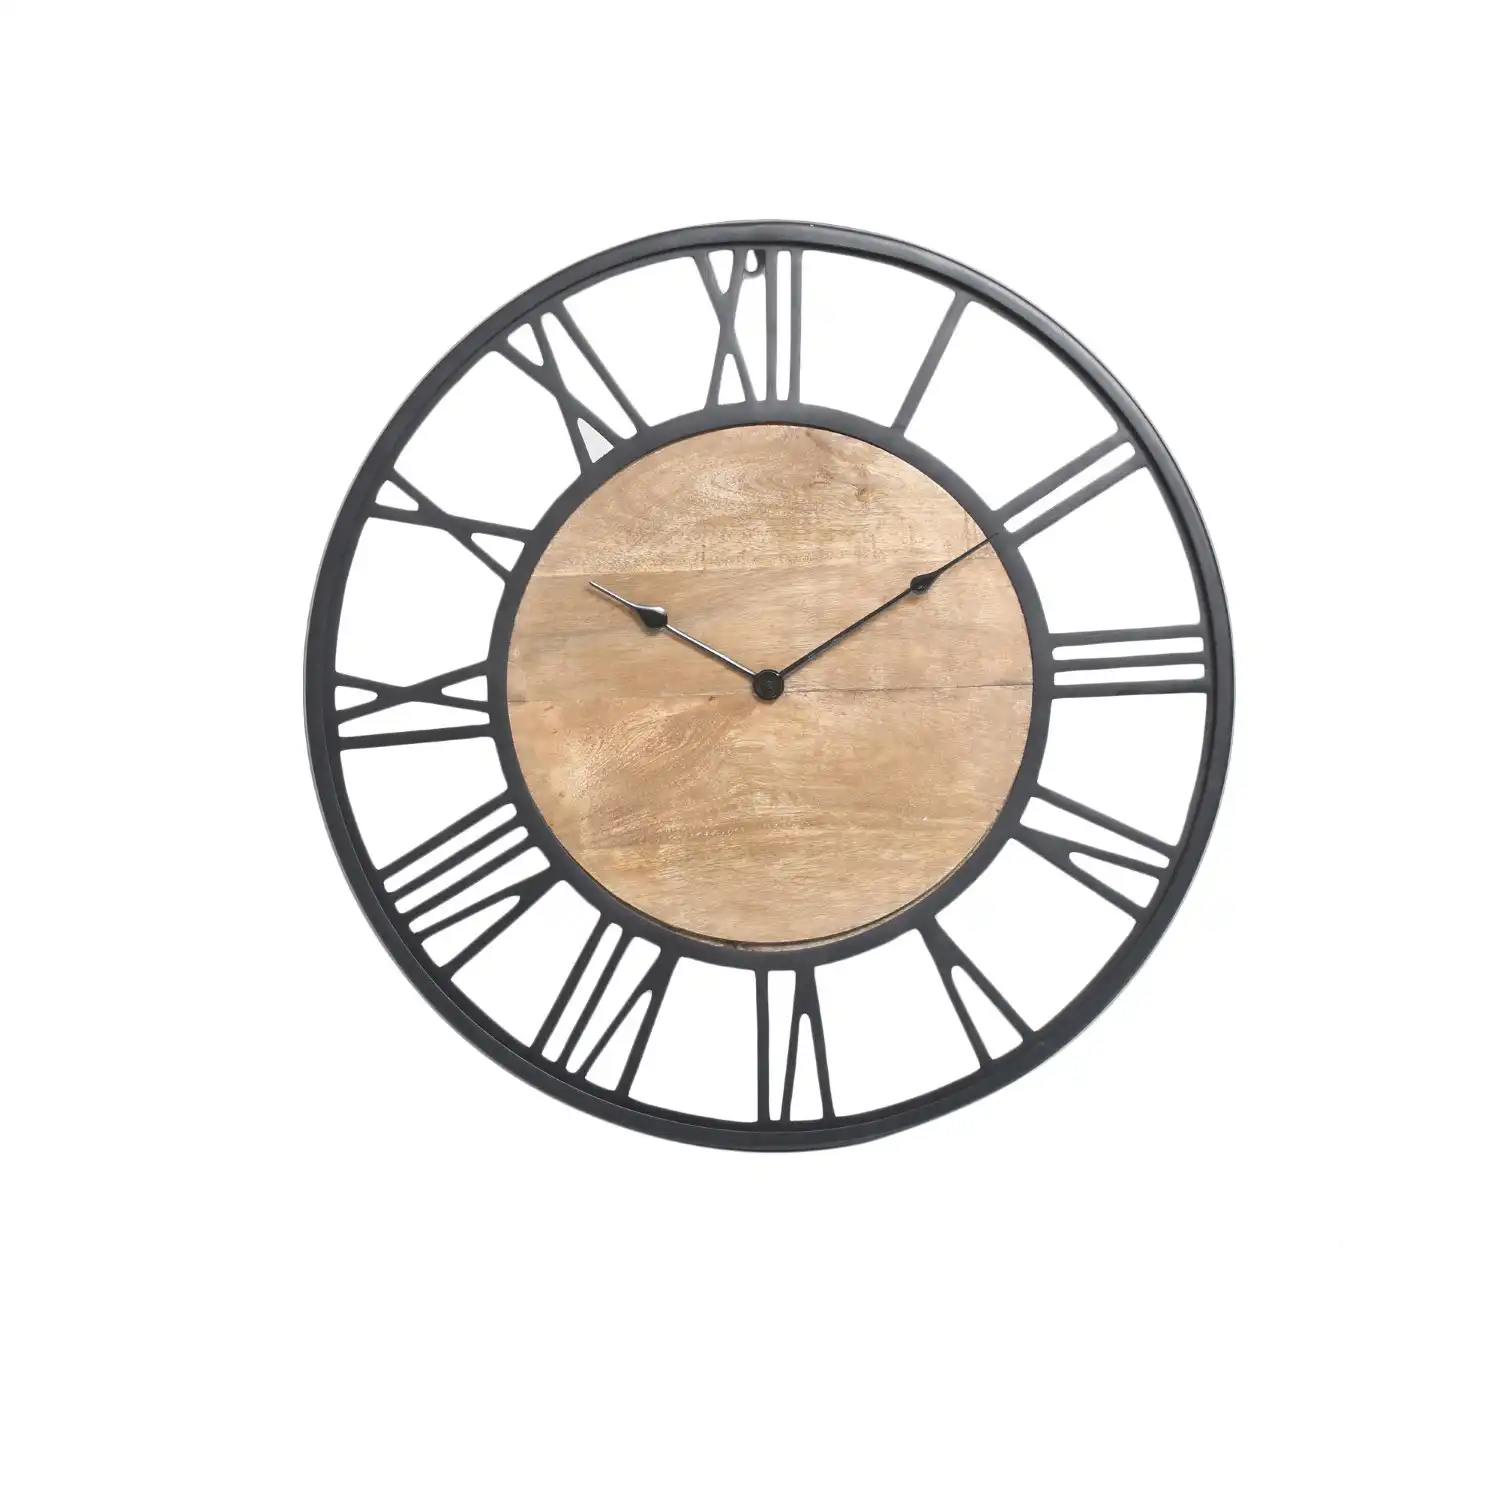 Round 60cm Black And Natural Wood Wall Clock